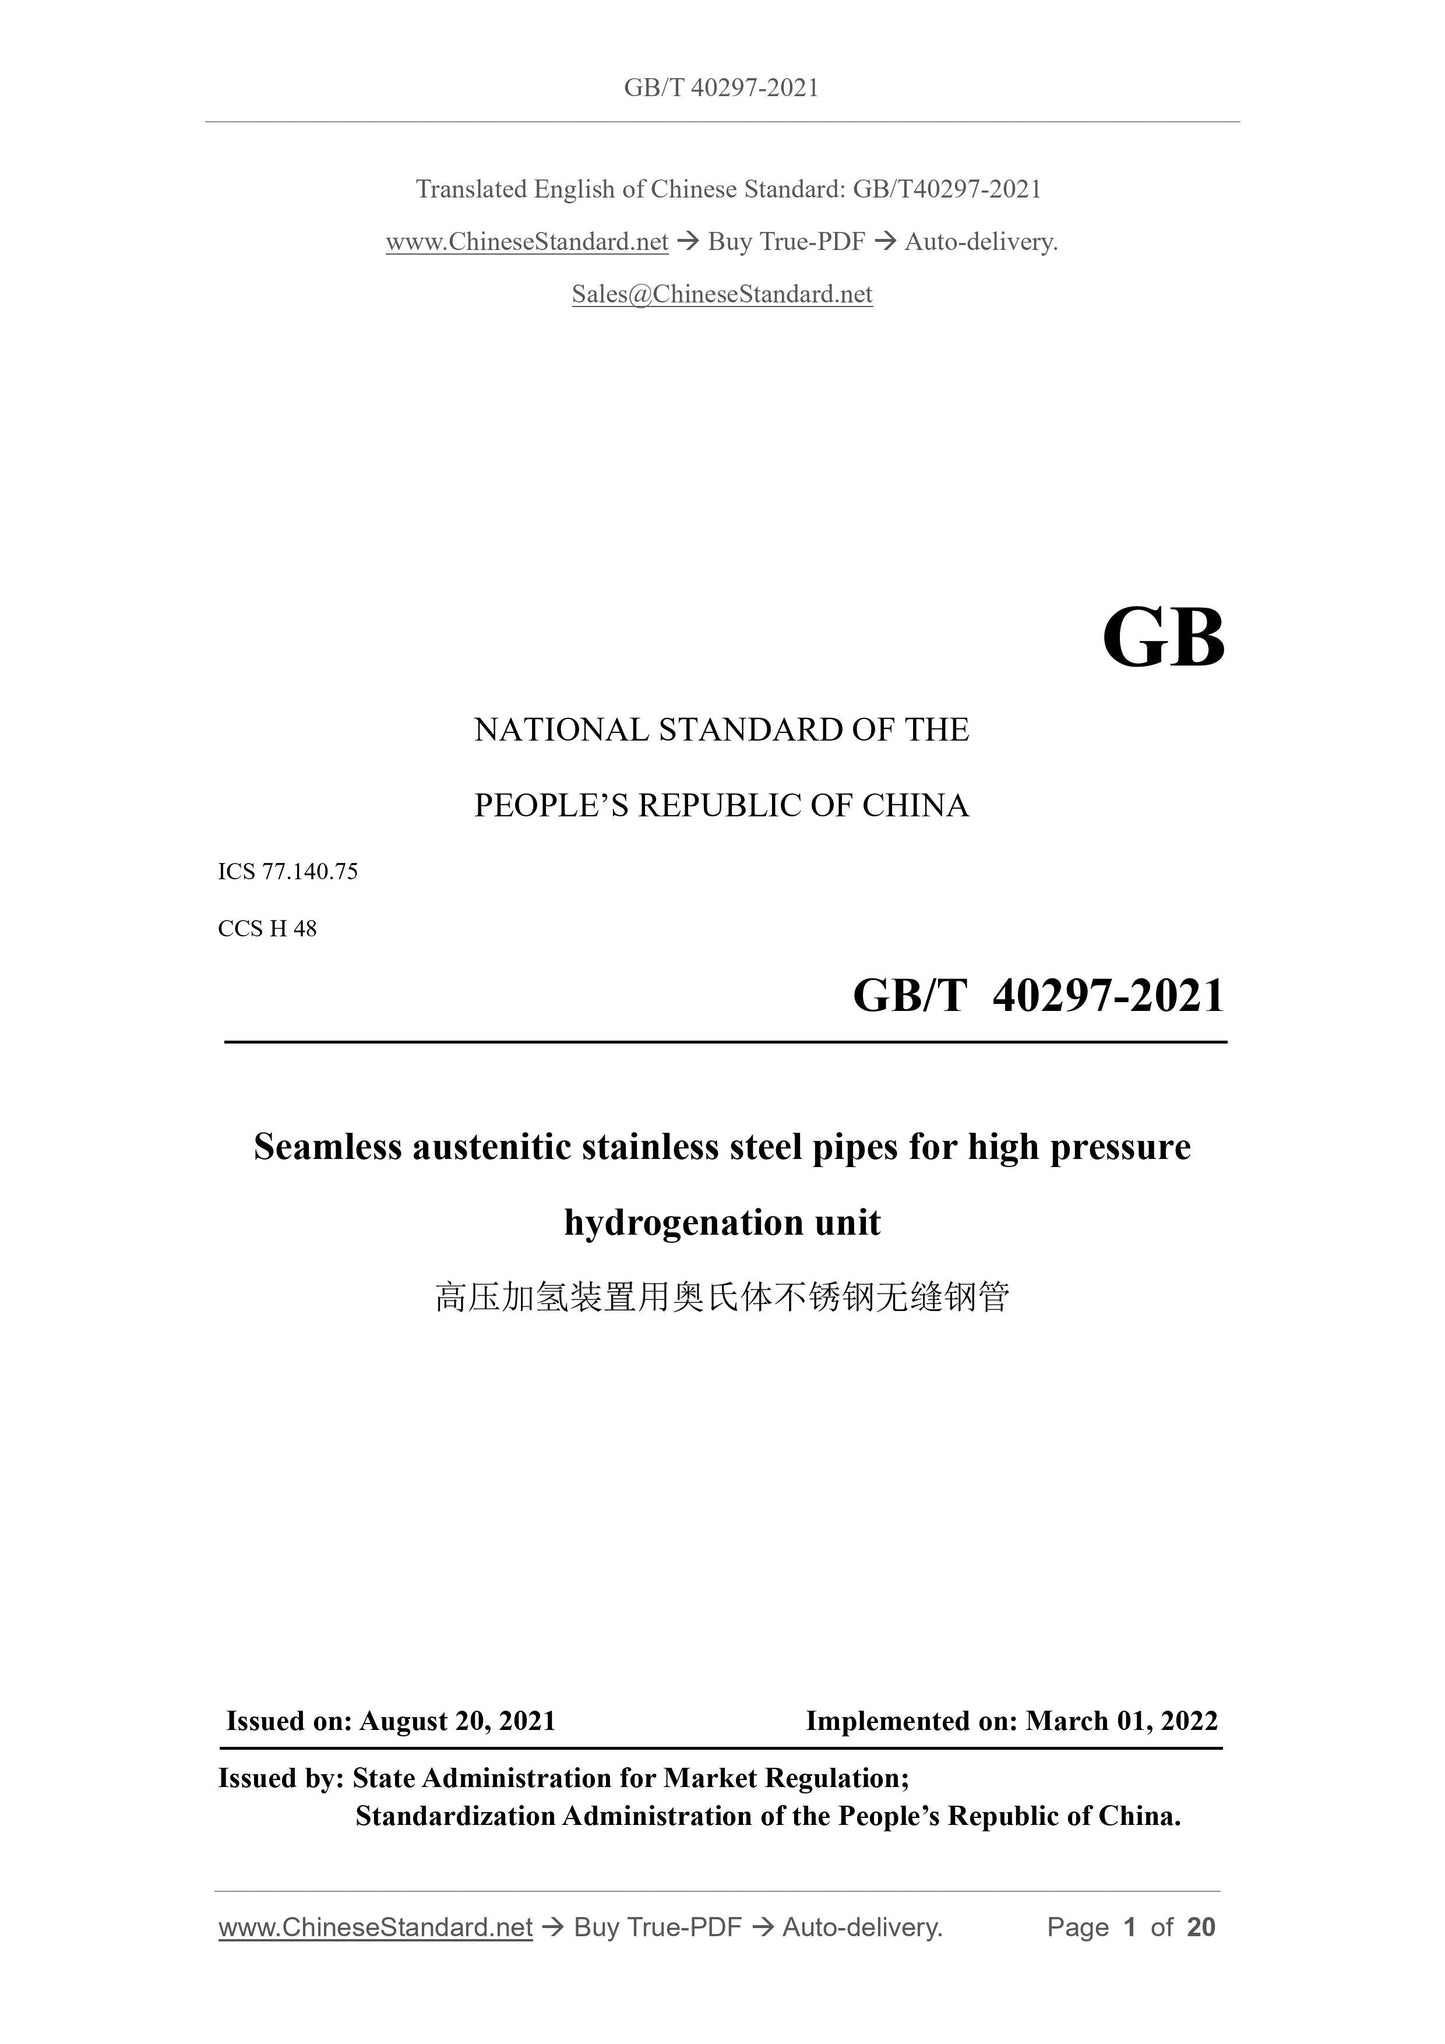 GB/T 40297-2021 Page 1